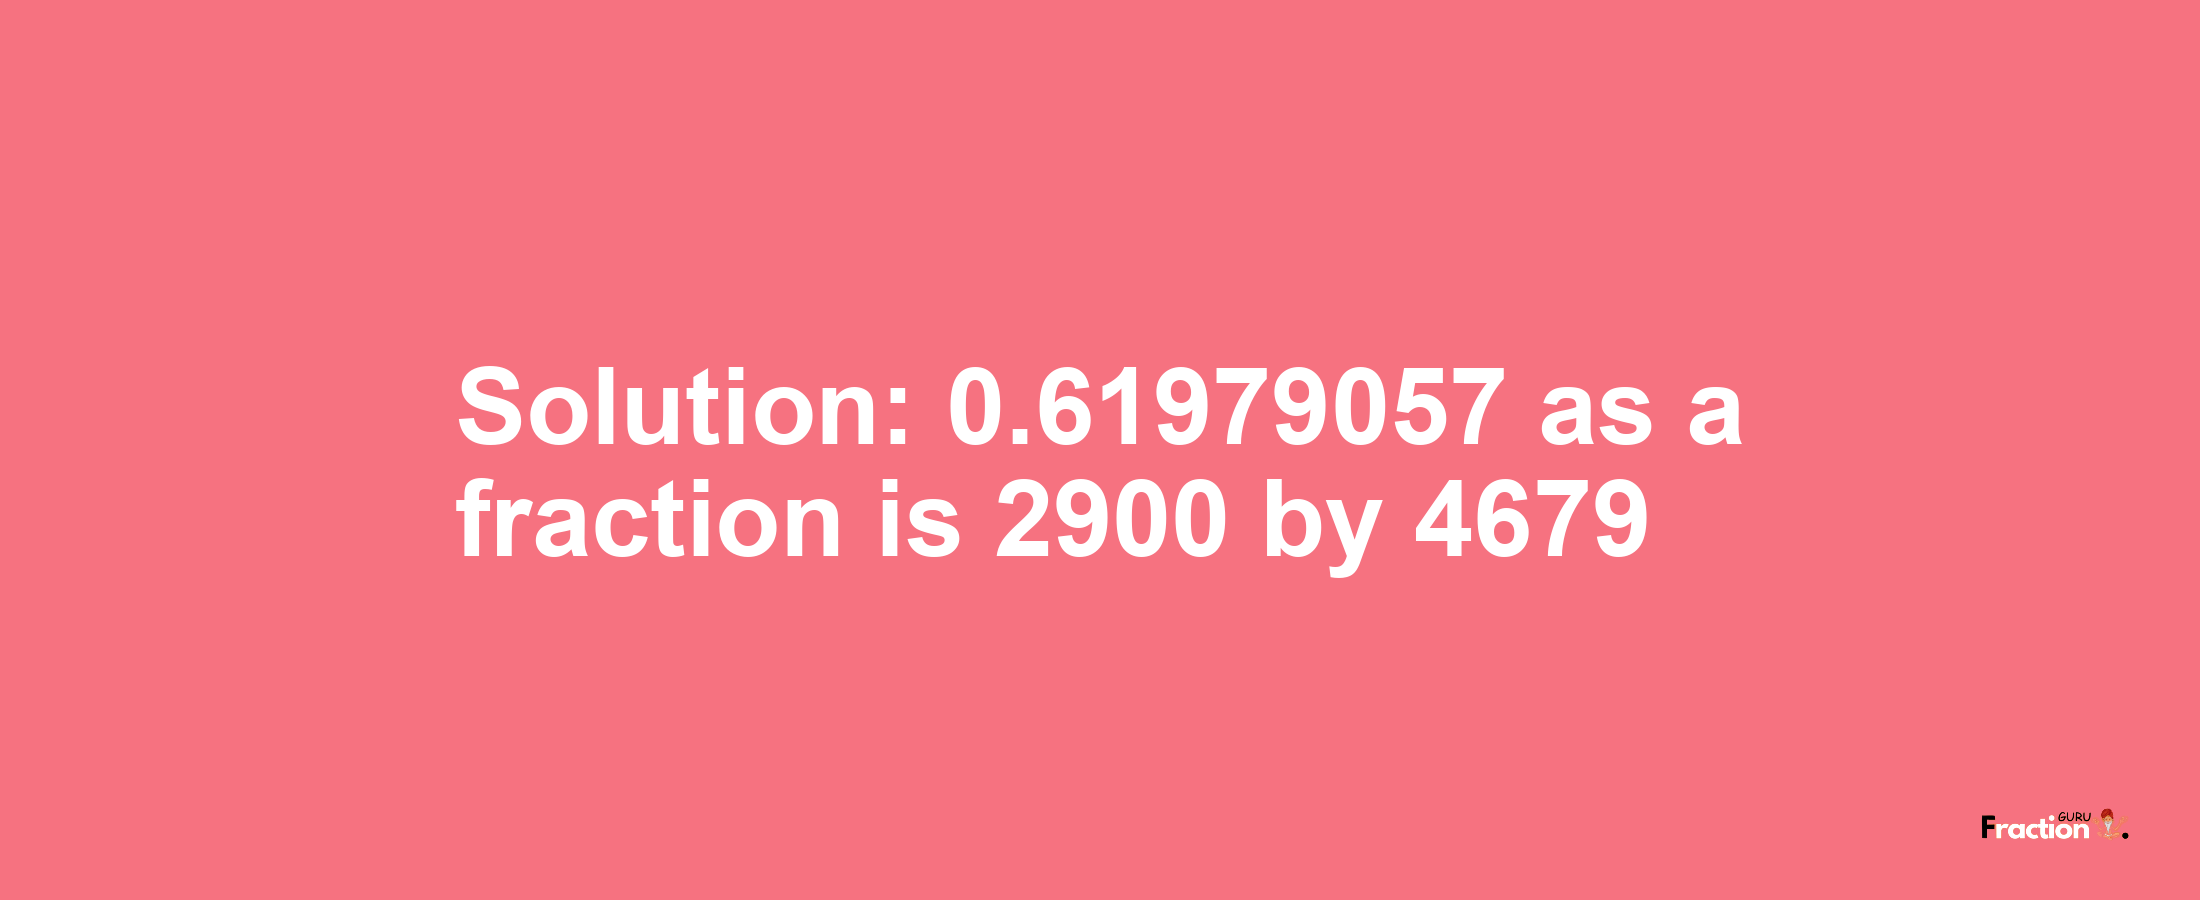 Solution:0.61979057 as a fraction is 2900/4679